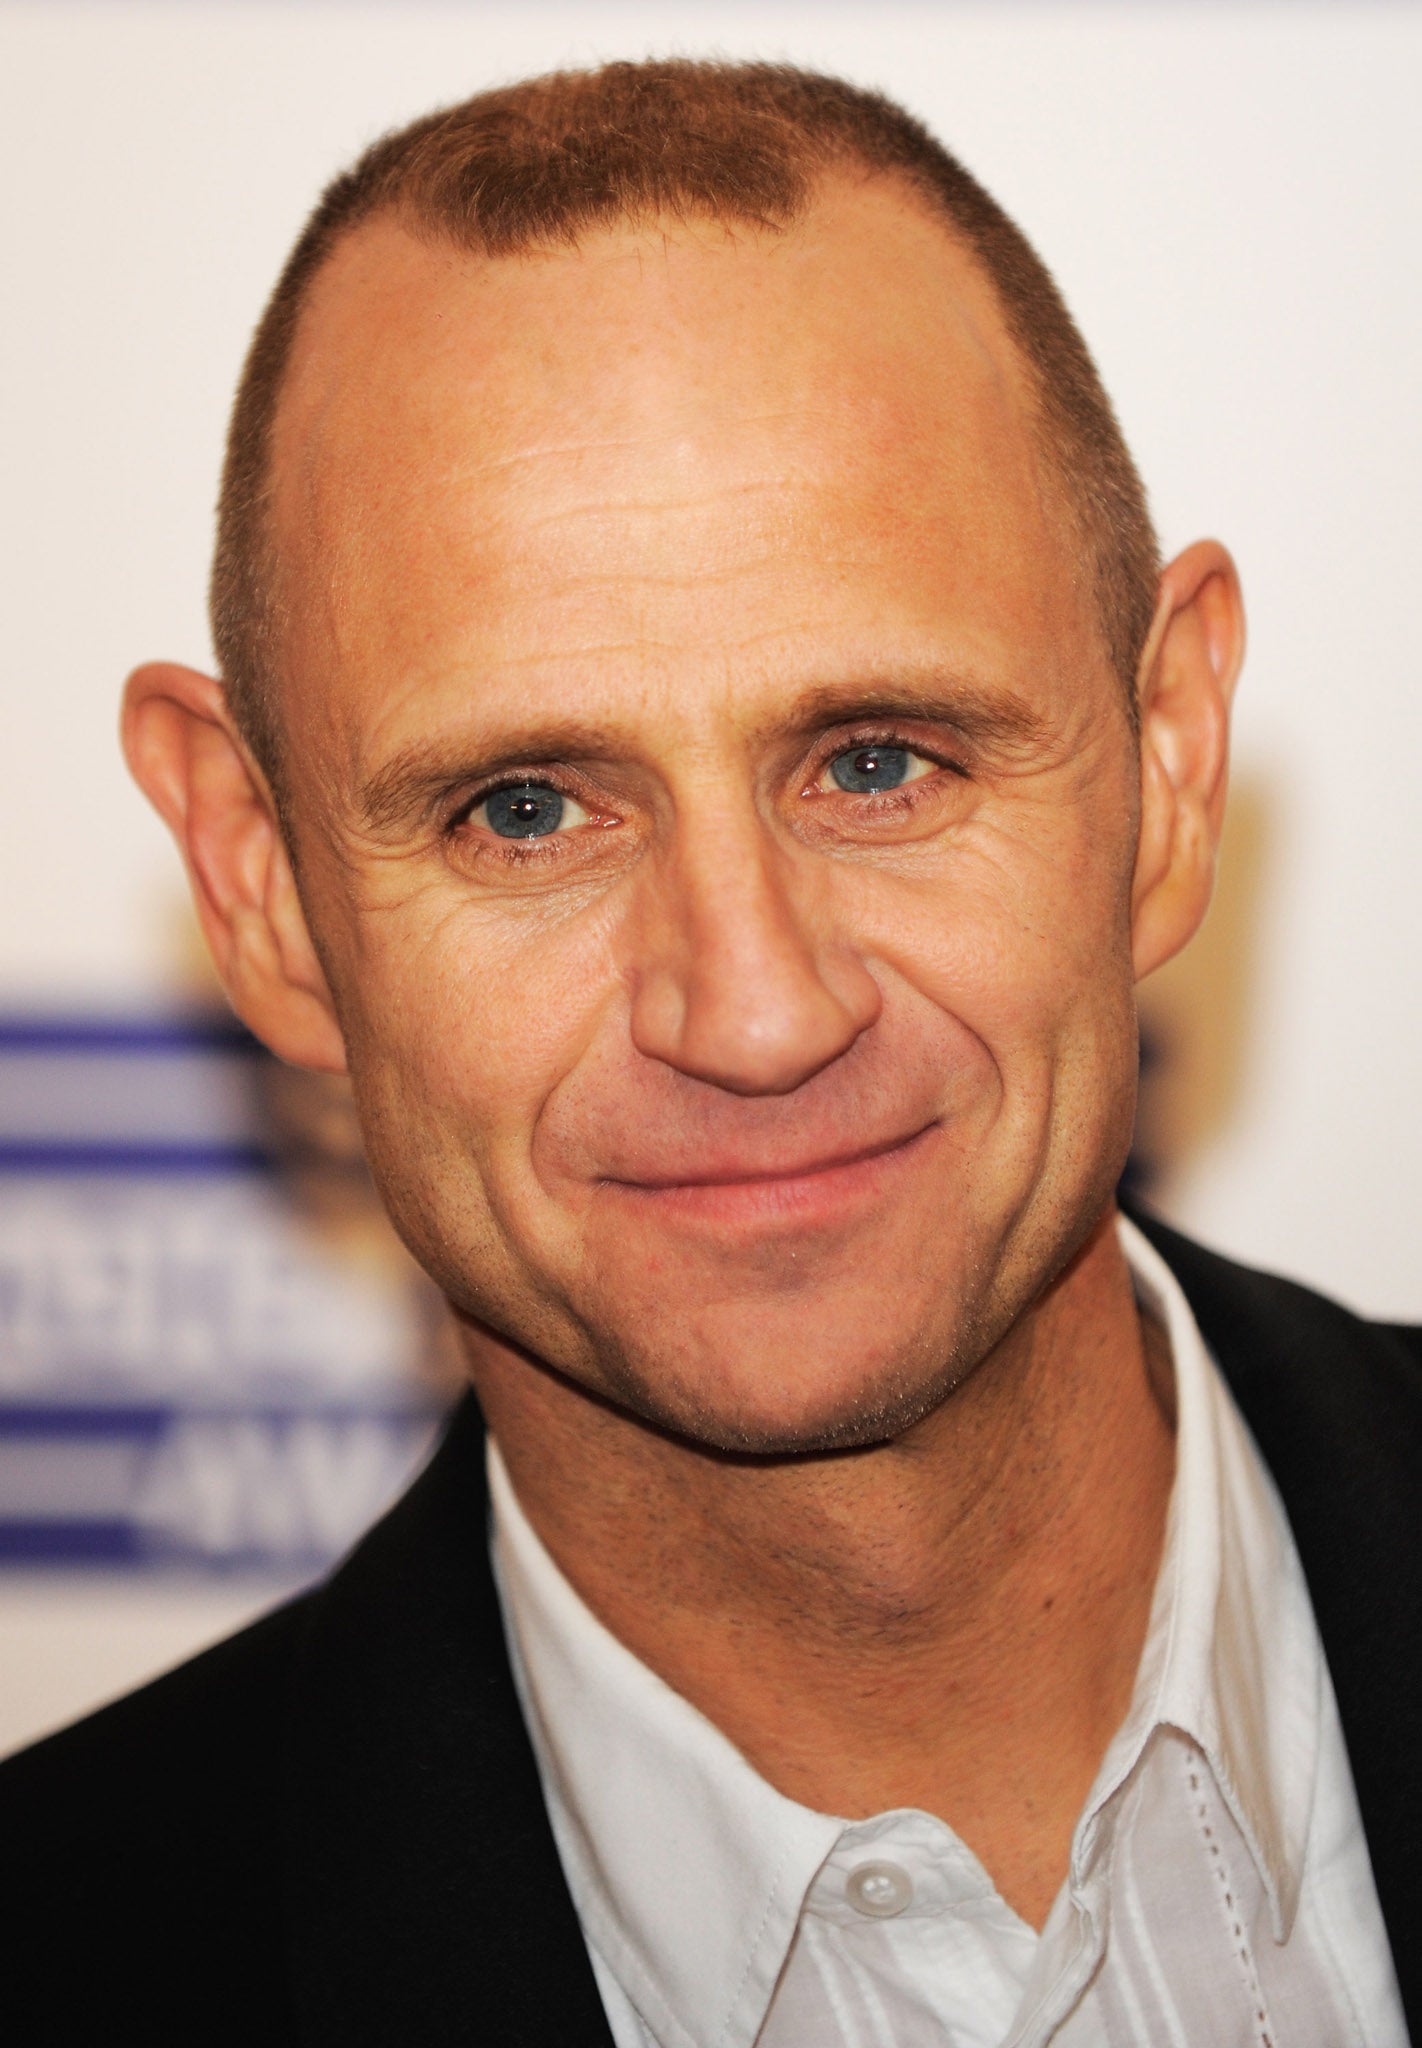 BBC broadcaster Evan Davis has spoken candidly about his experiences coming out as gay